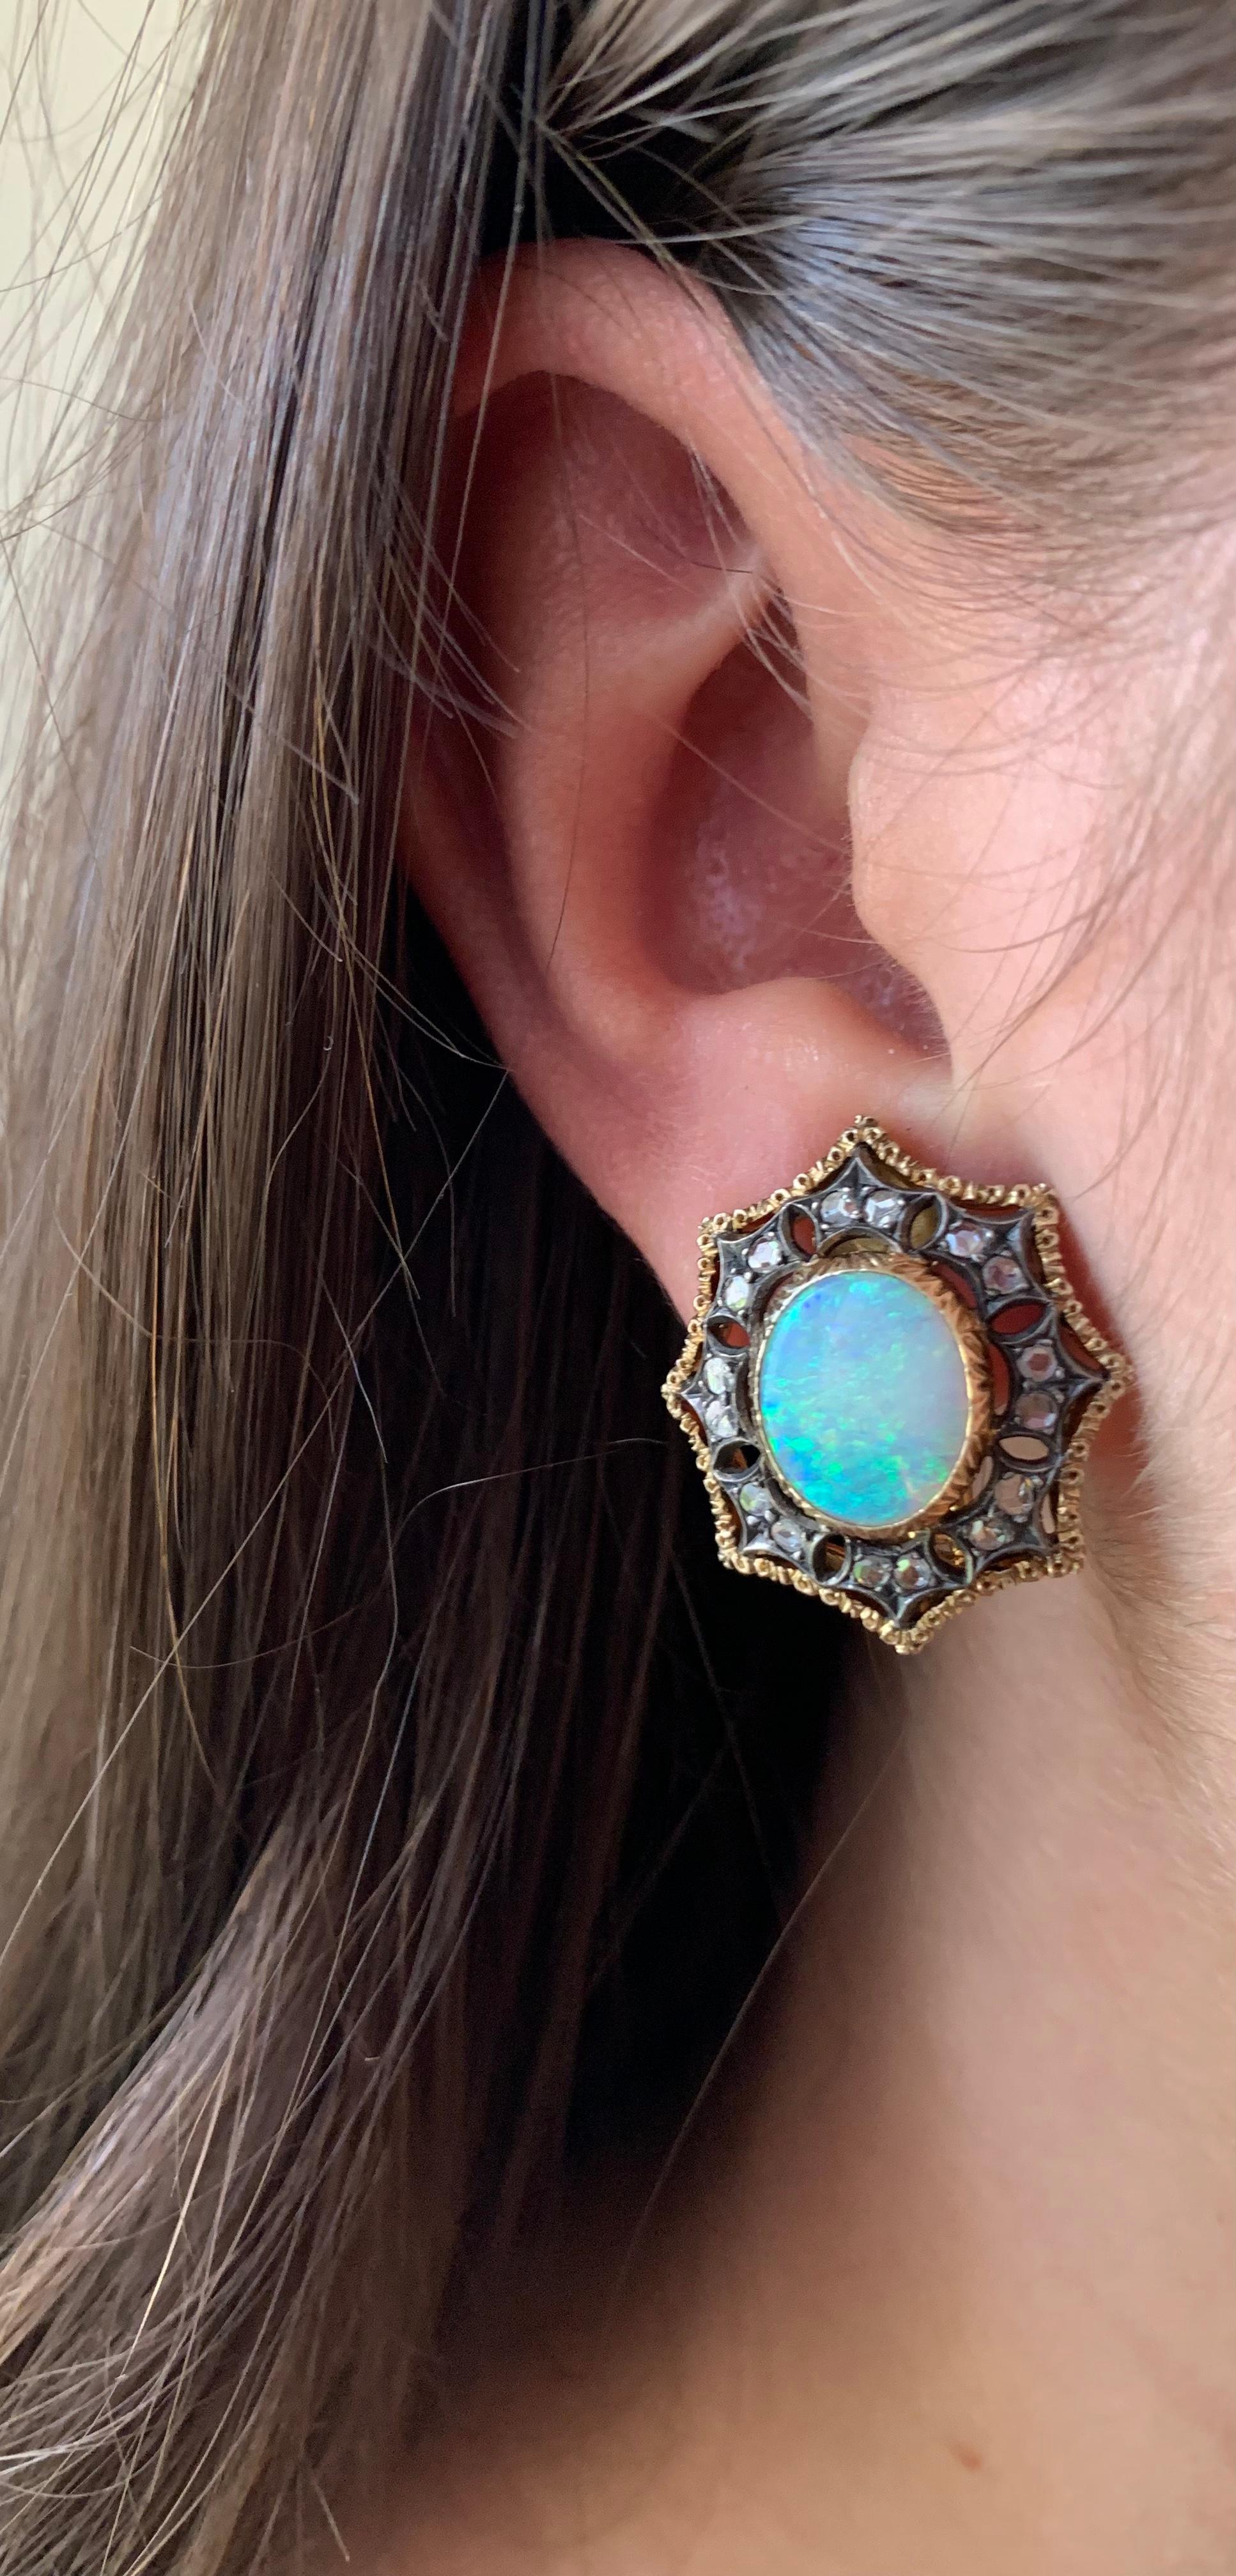 Stunning and substantial estate Mario Buccellati cabochon opal diamond 18K yellow and patinated white gold earrings
20th Century
Original Buccellati octagonal burgundy leather velvet lined box
The large central 11mm by 9.5mm oval cabochon opals